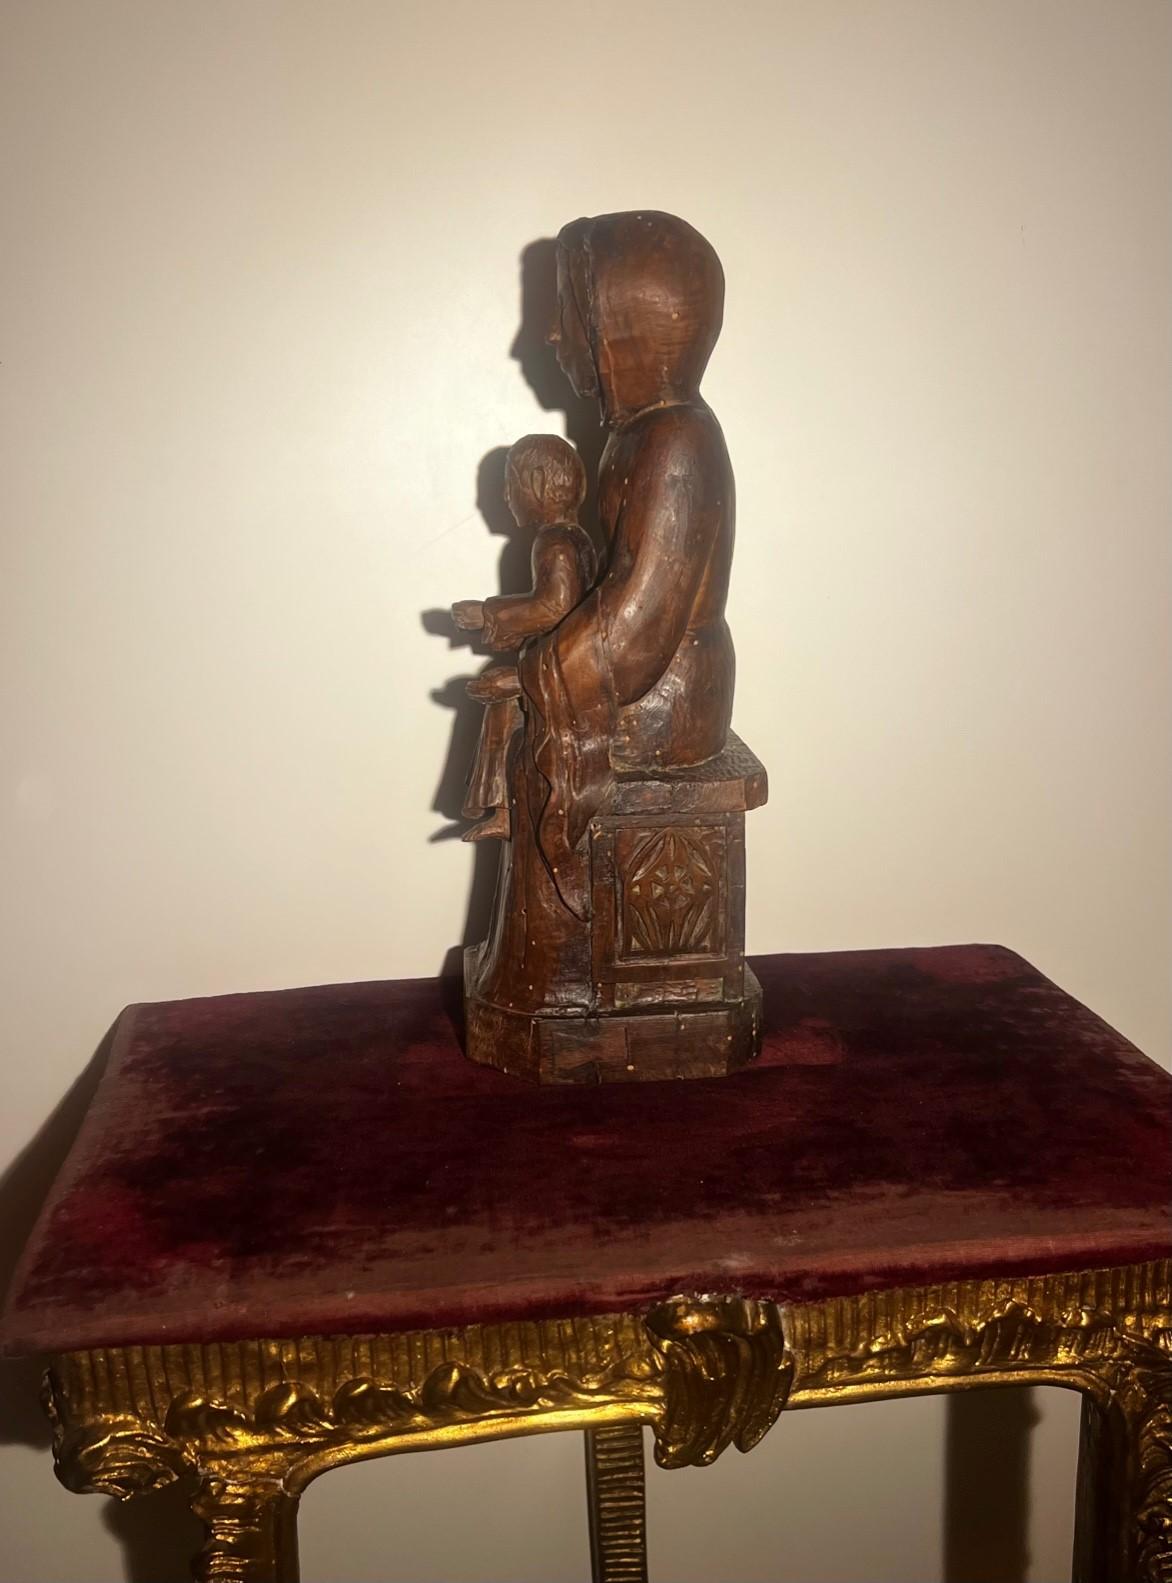 This extraordinary museum piece Enthroned Virgin Mary with the child on her lap comes from the Rhone region in France. The saint symbol and protector of France, this statue of Madonna was found with a Tabernacle ( the interio fabric/ velvet has been